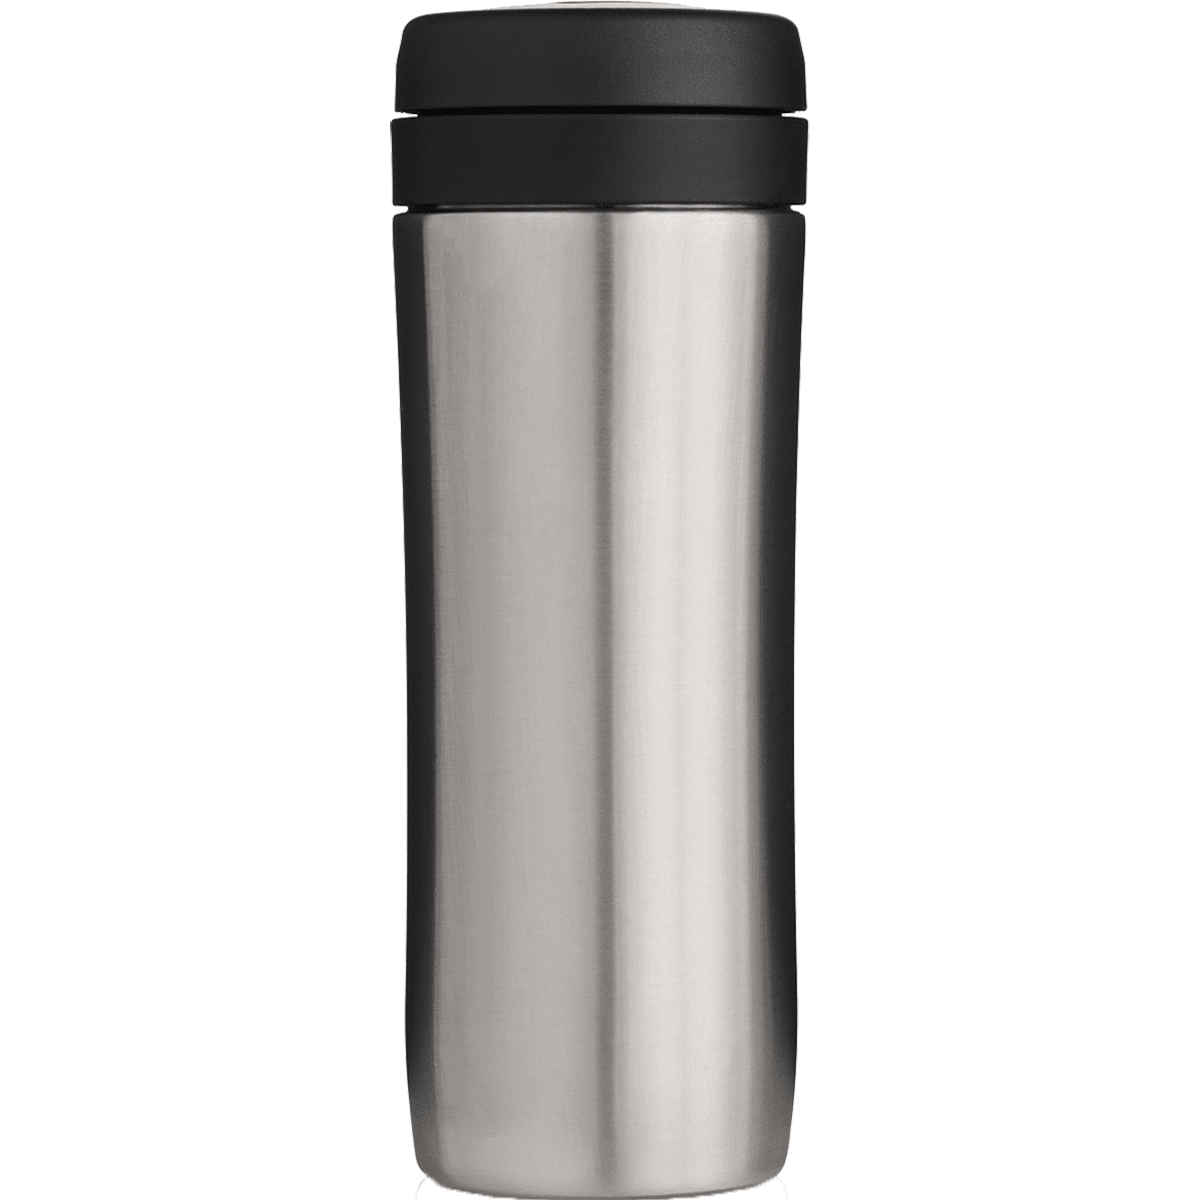 Espro Travel Press For Coffee